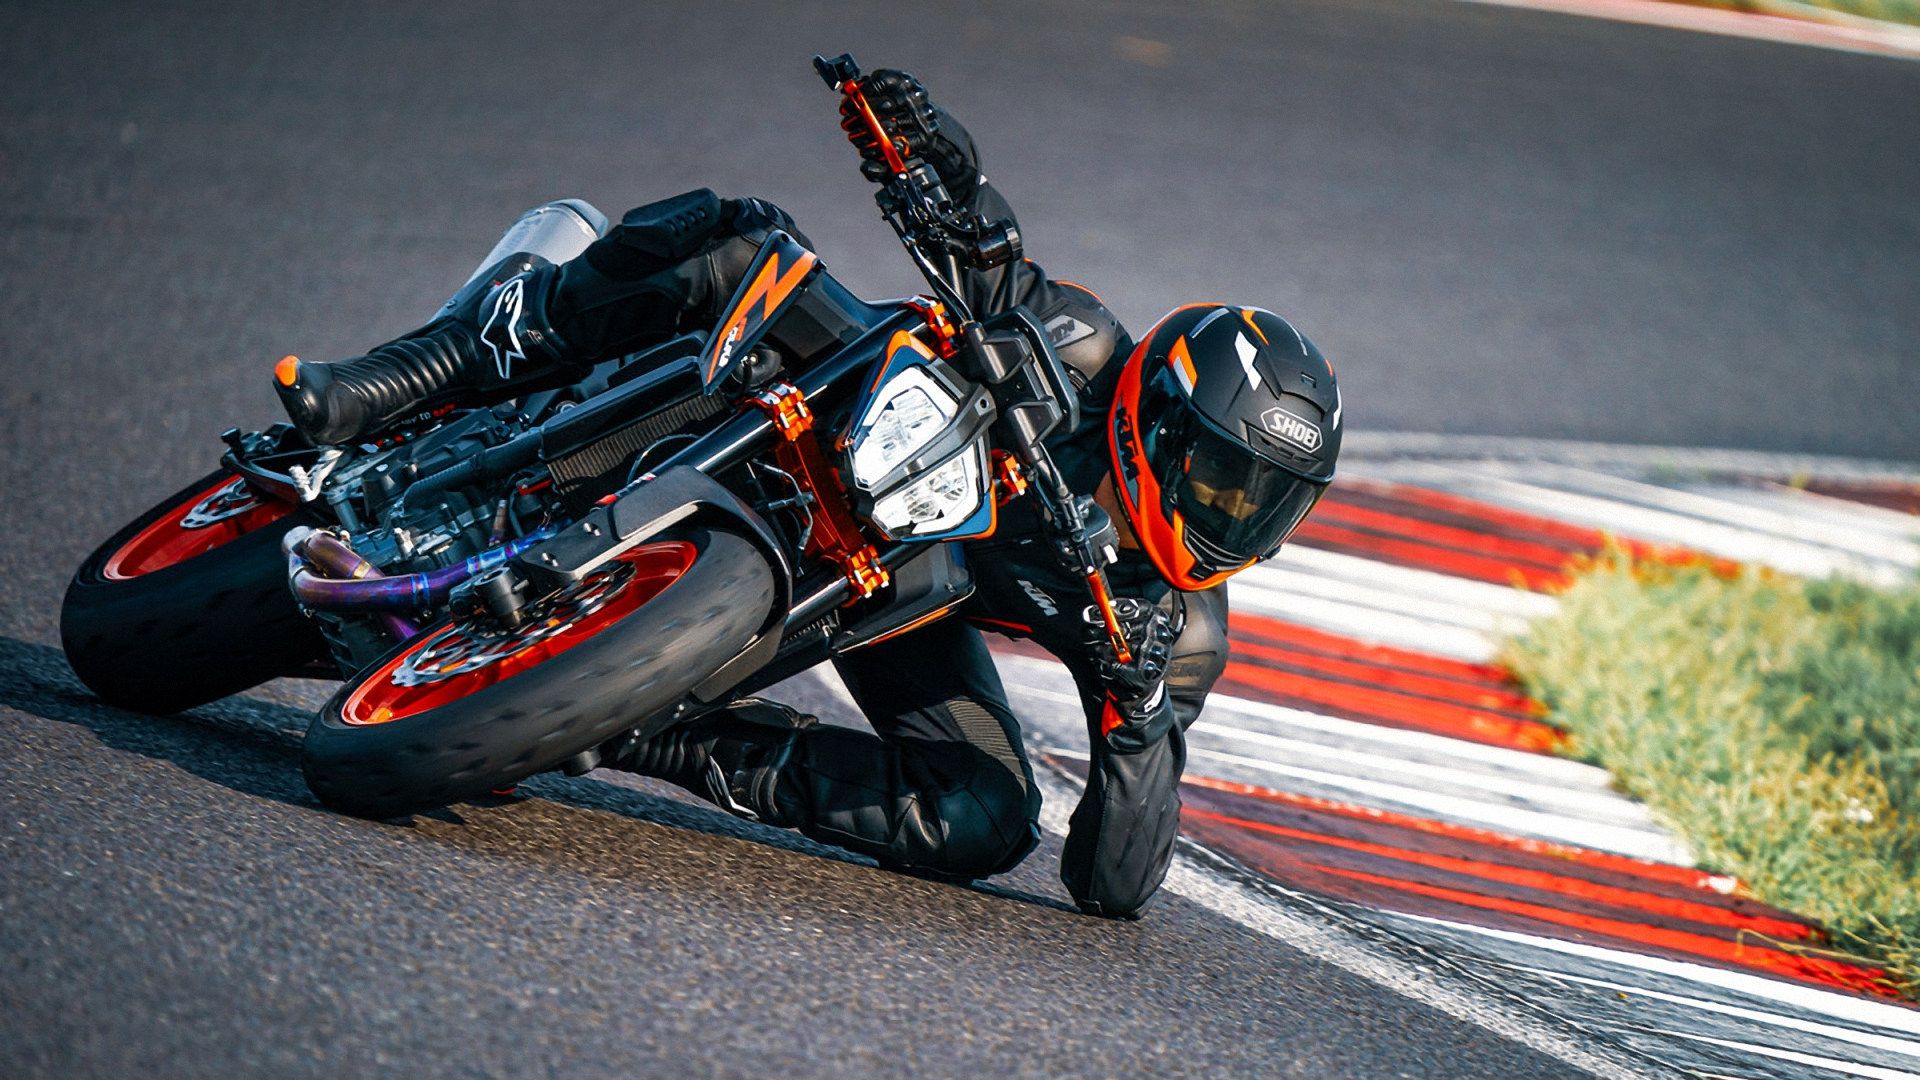 2022 KTM 890 DUKE R coming out of a curve